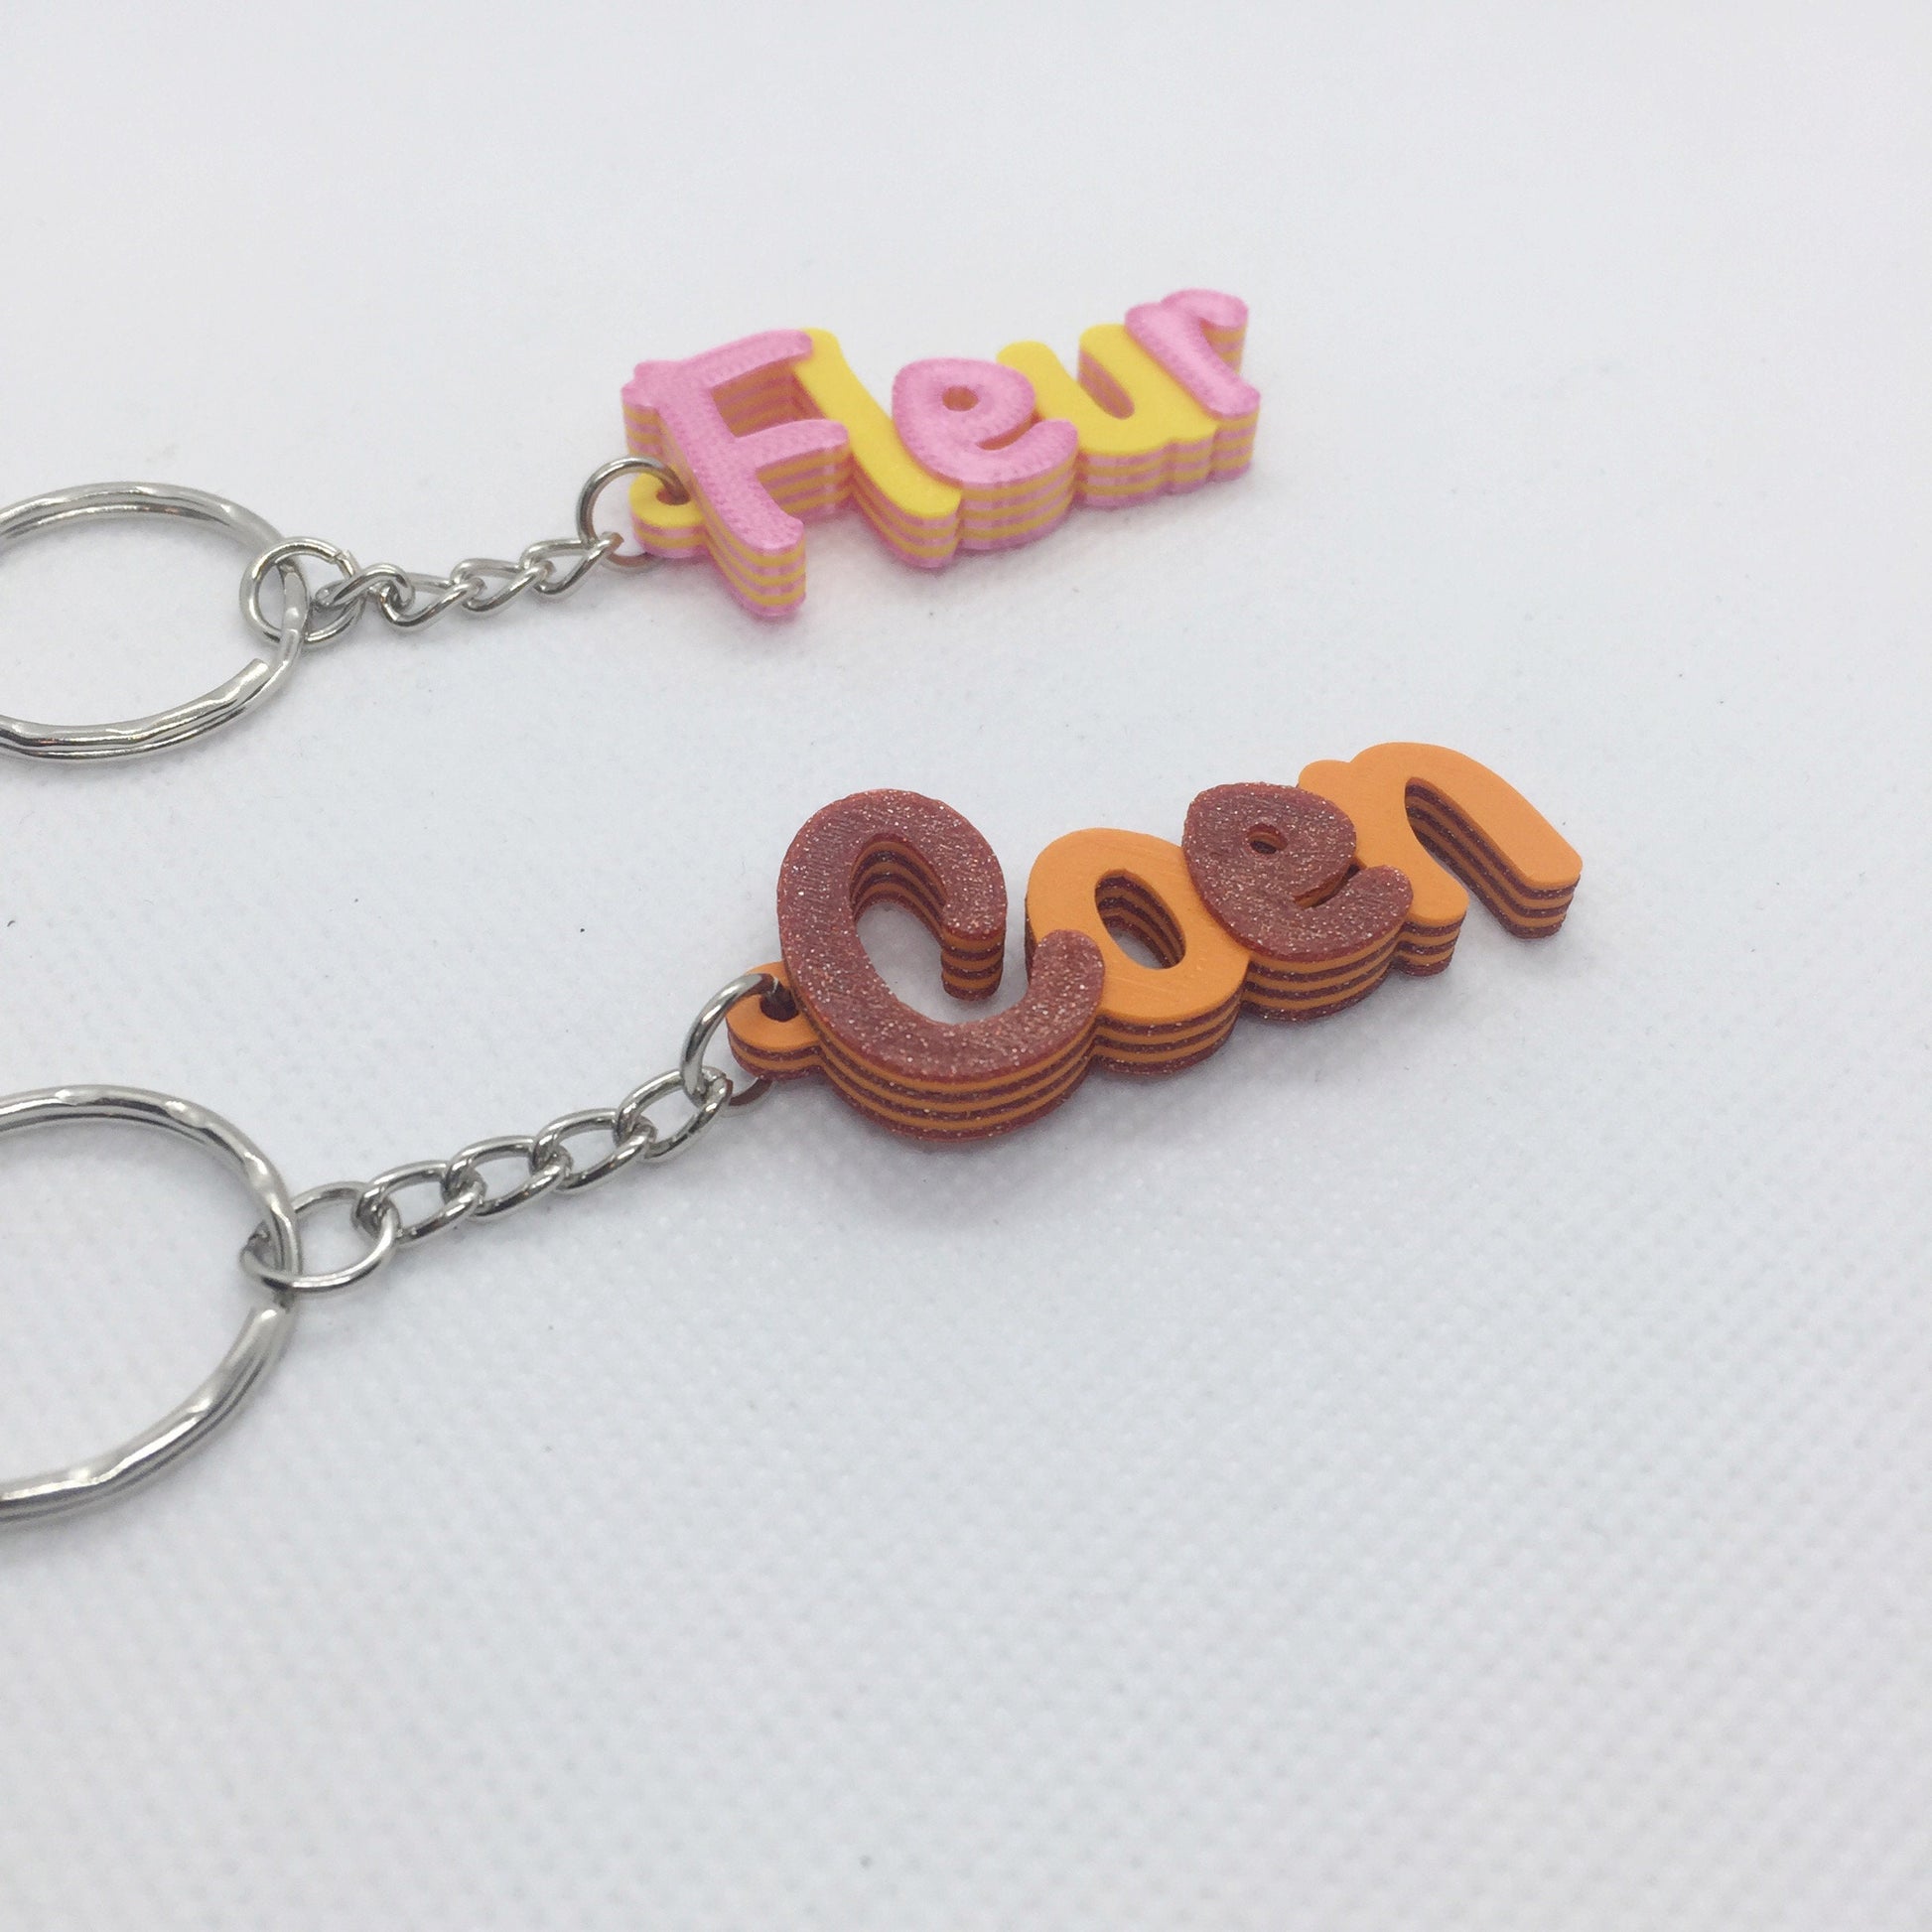 WeLove3D Bulk Order Multicolour Personalised Keyring, Gifts Under 5, Party Bag Filler, 3D Printed Keychain, Keychain Favours, School Bag